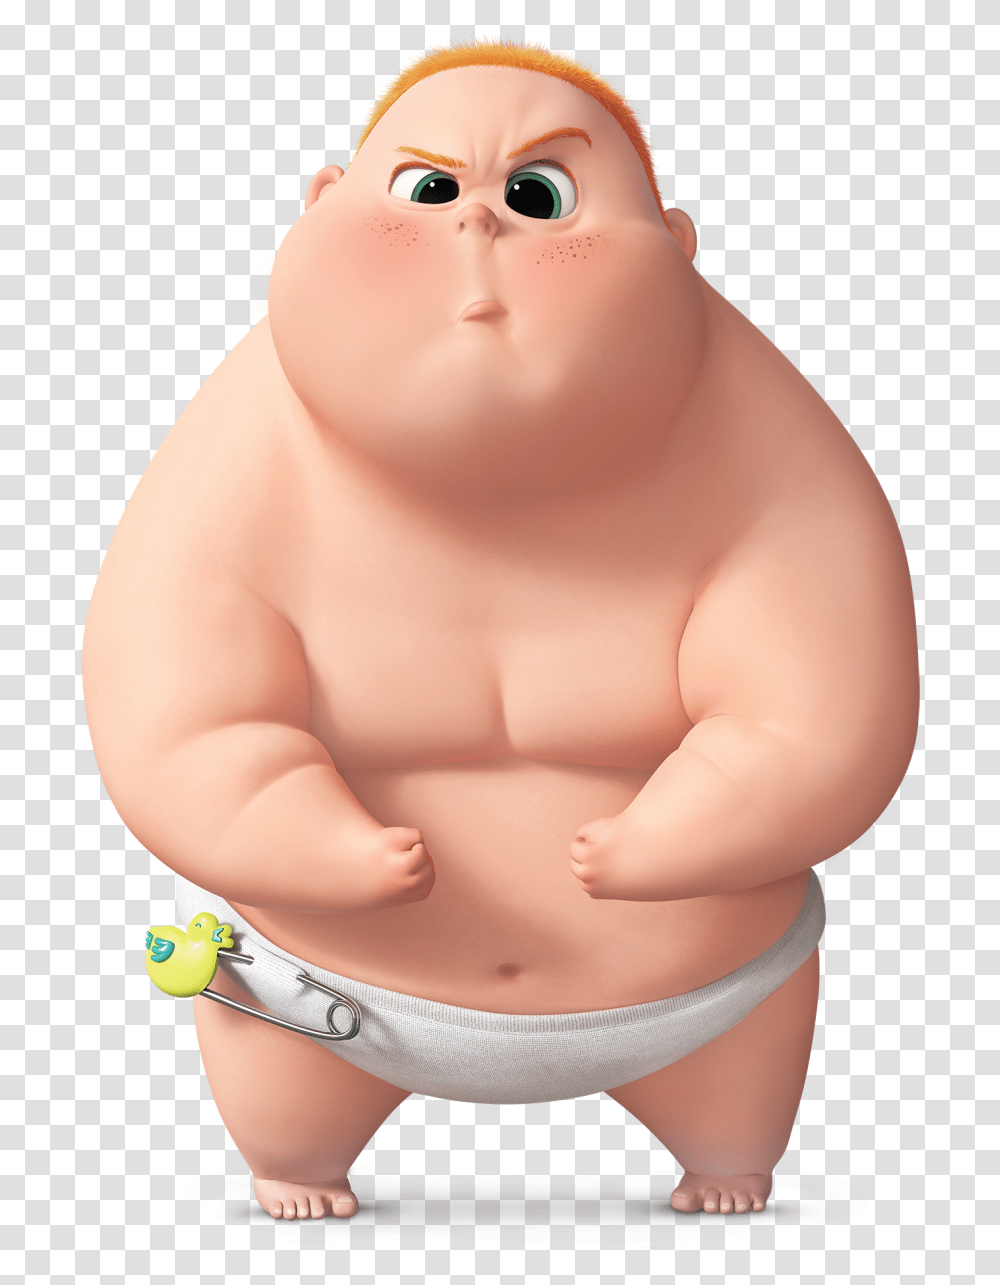 Baby Boss Baby Big Fat Baby, Person, Human, Finger, Underwear Transparent Png